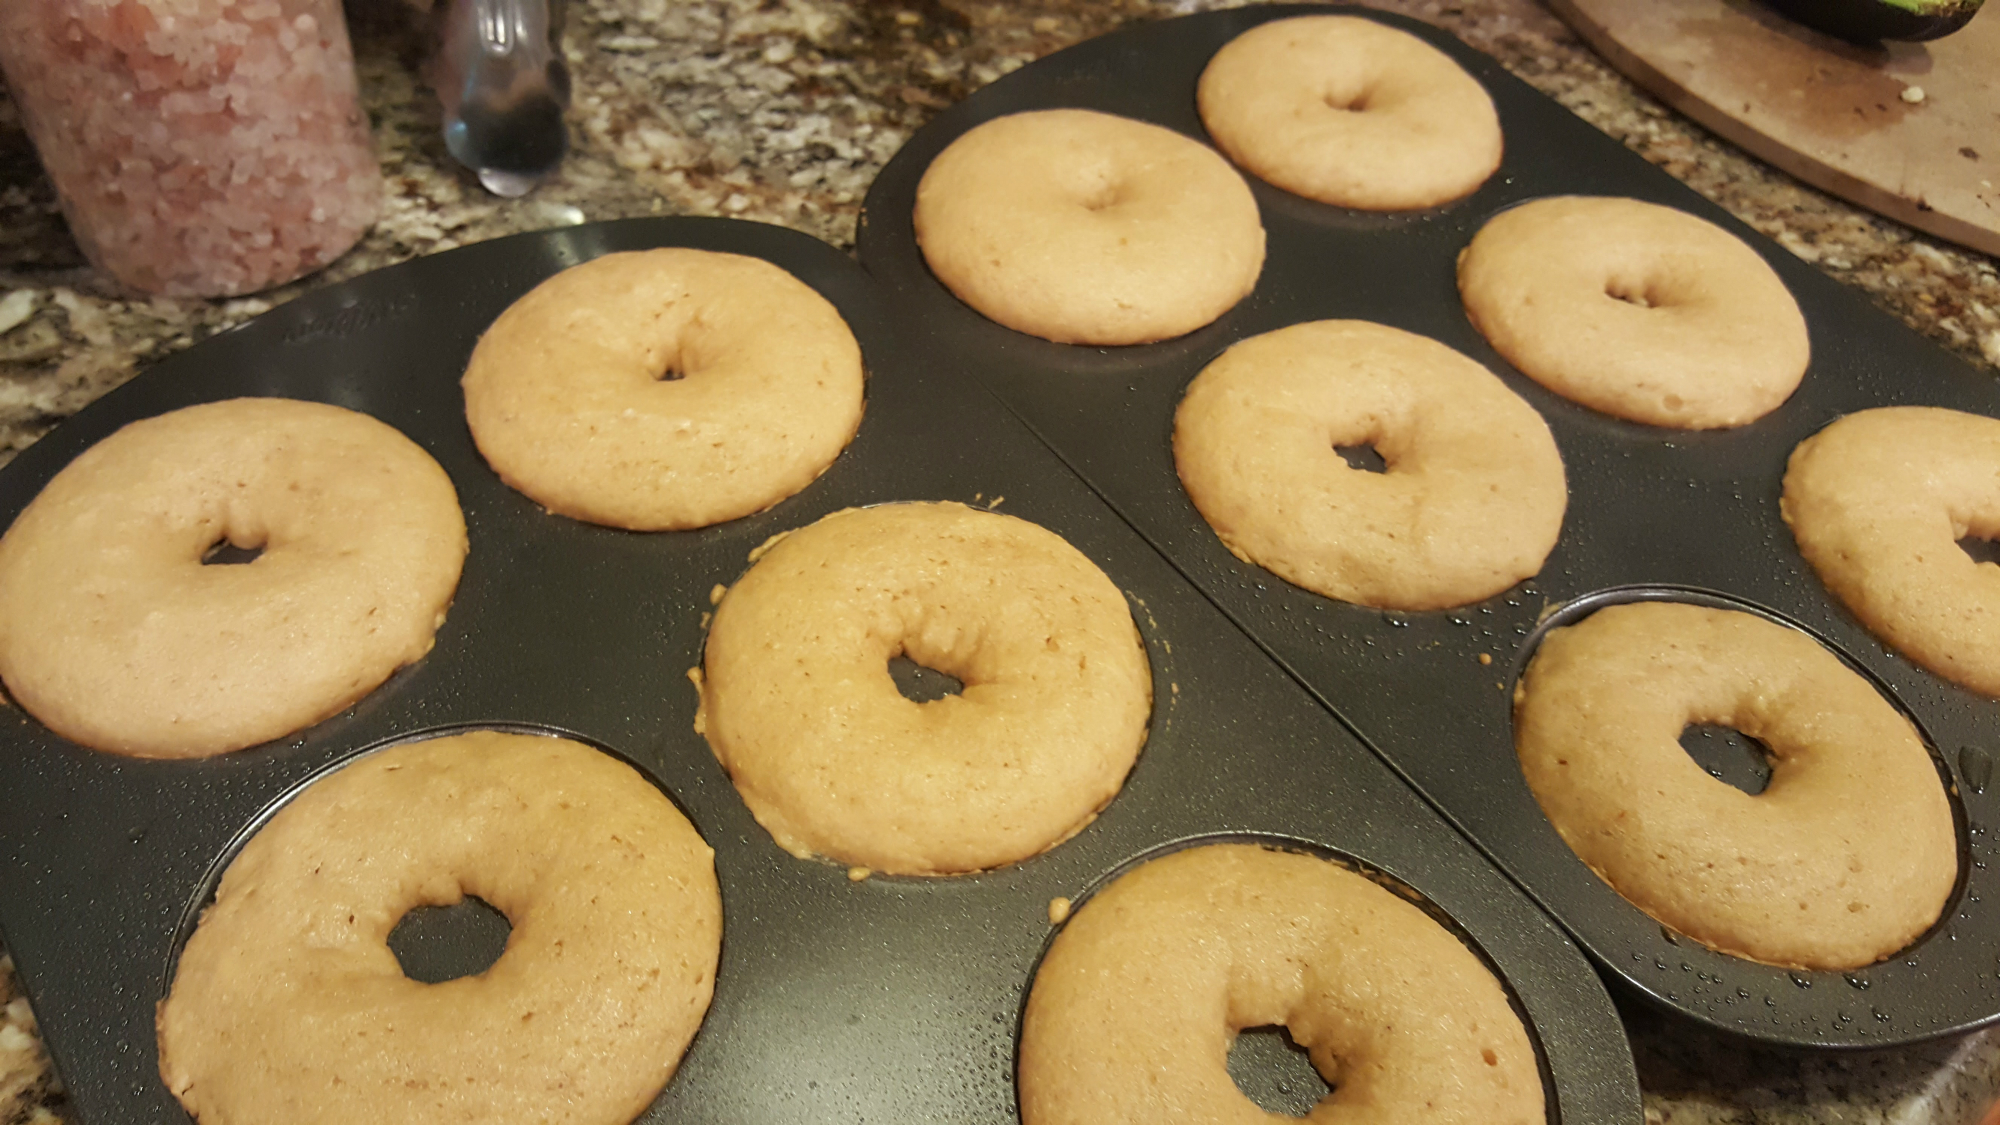 100% Baked Donuts with Cinnamon-Sugar Topping